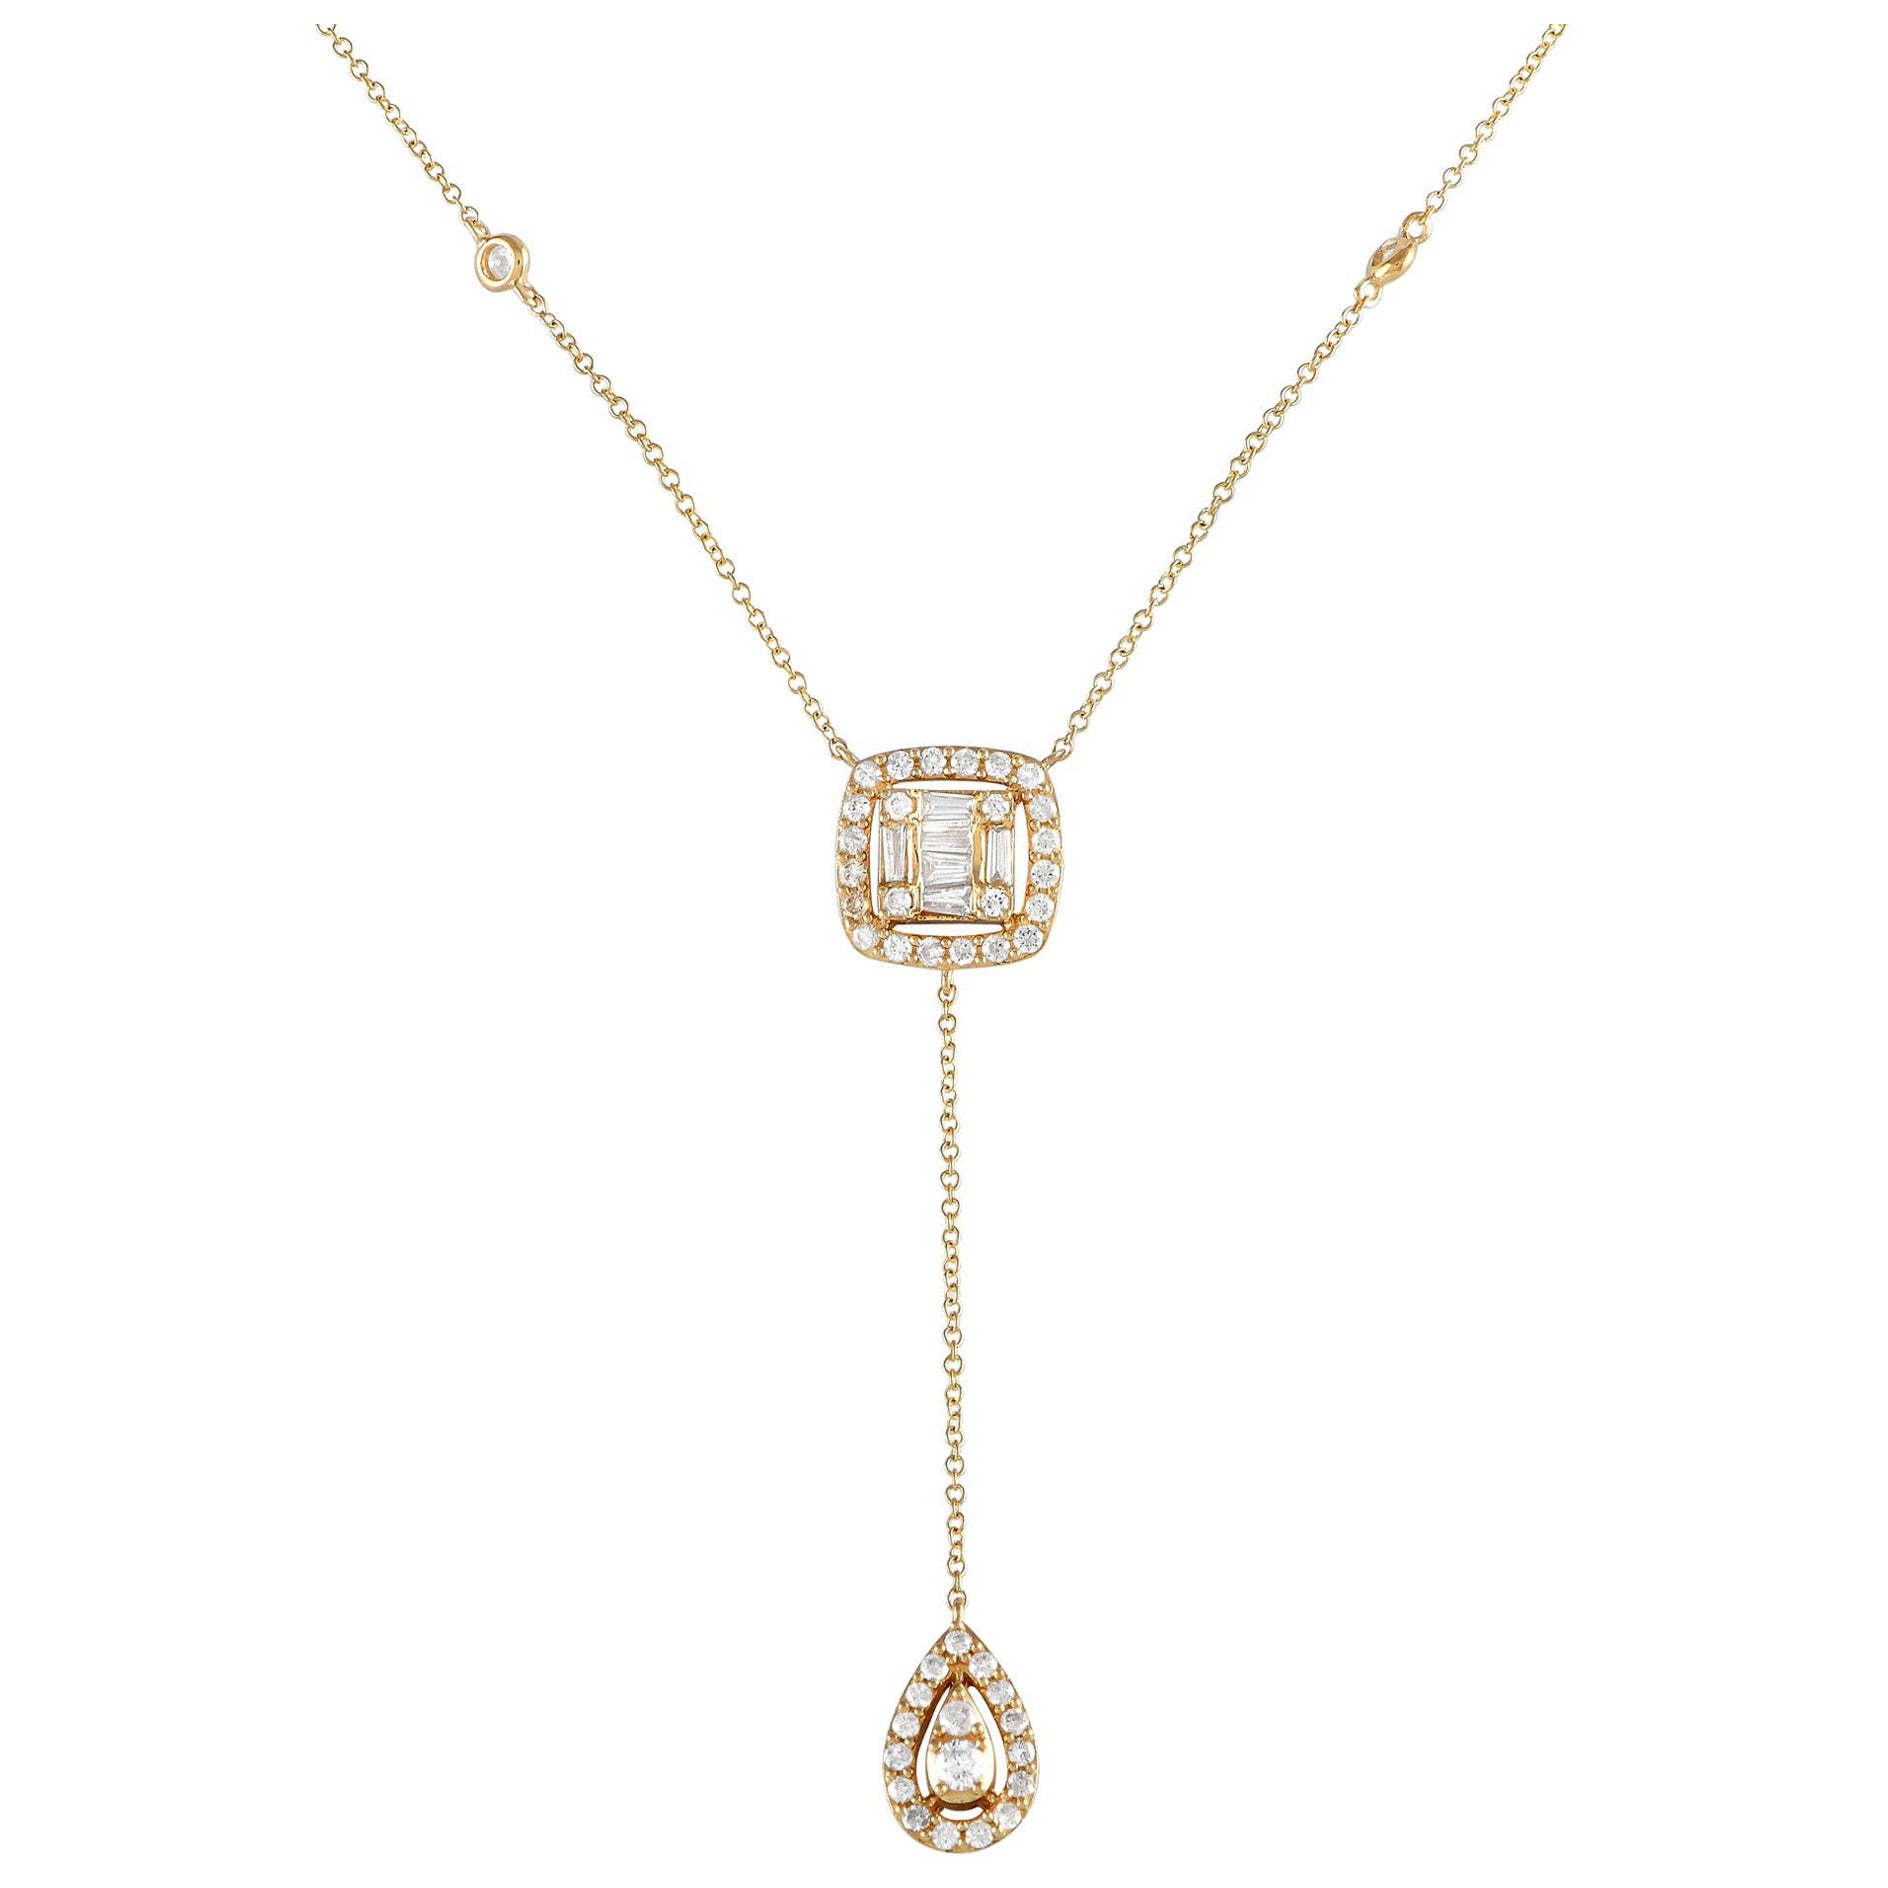 LB Exclusive 14K Yellow Gold 0.65ct Diamond Necklace NK01381 For Sale